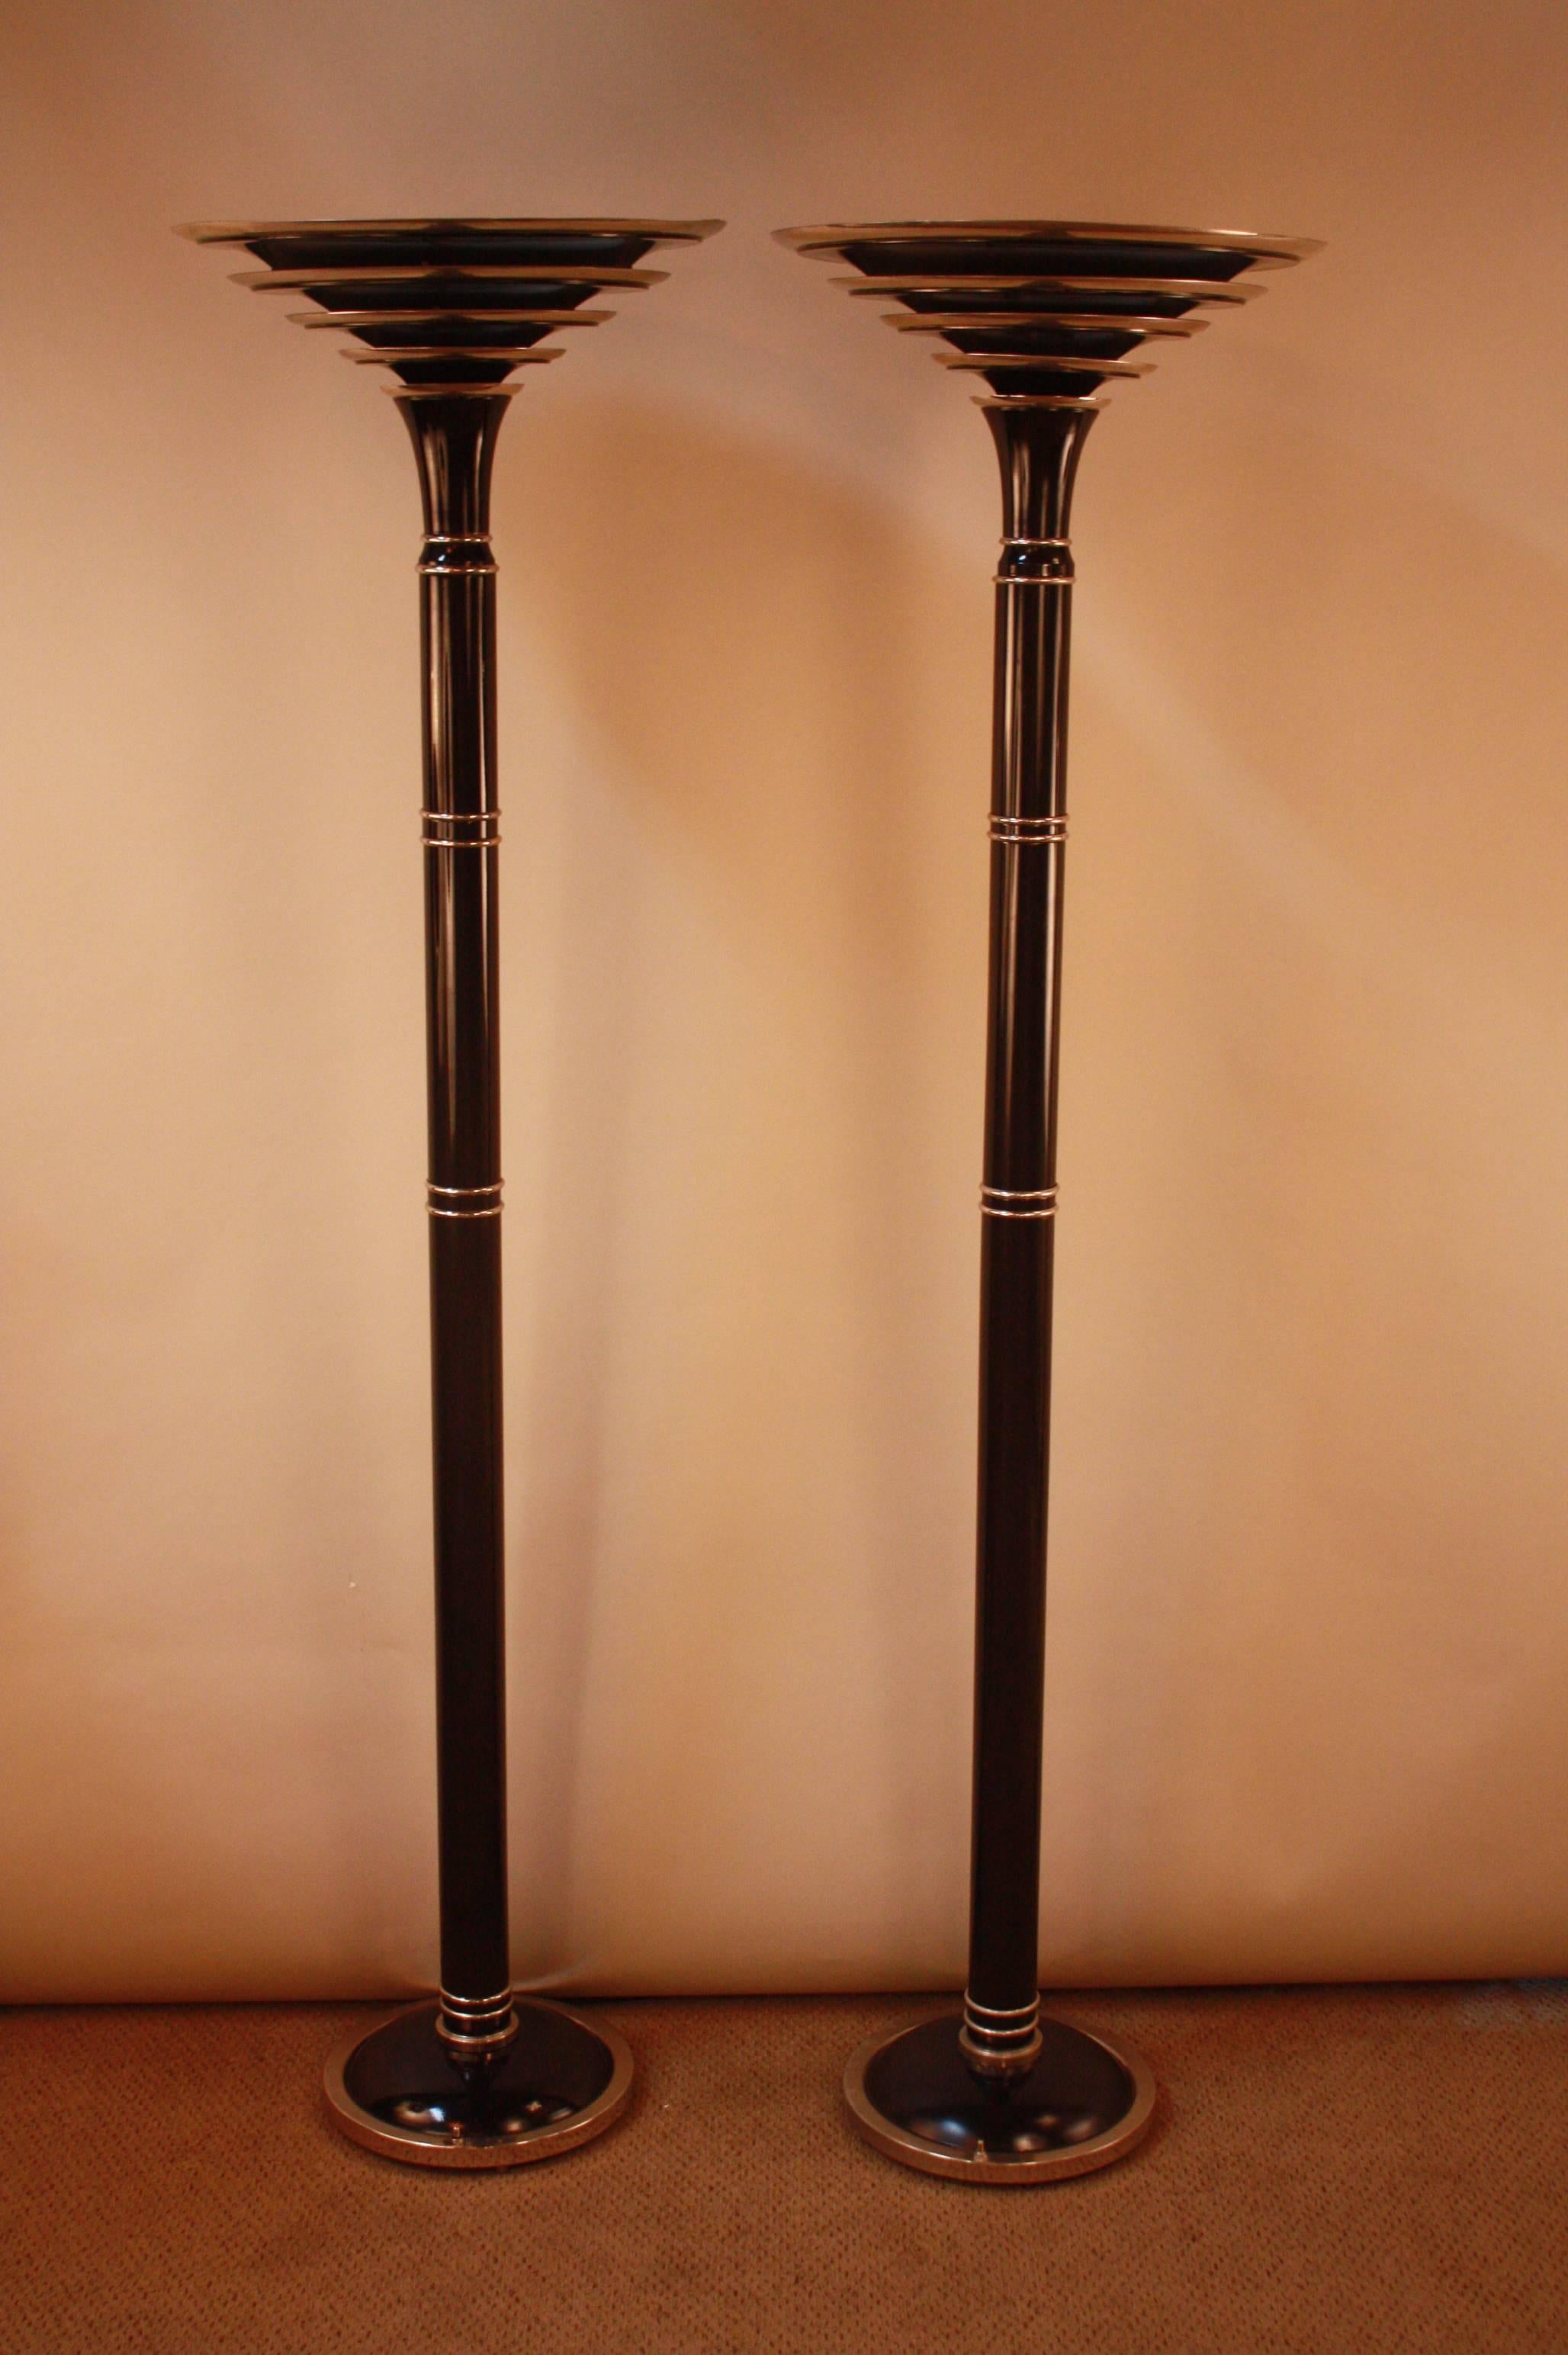 A pair of four-tier shade French floor lamps made of nickel and black lacquer. The dark color and sleek silhouette brings the viewer to the period of Art Deco, in pre-World War I France. A truly beautiful piece for its time, this pair will bring